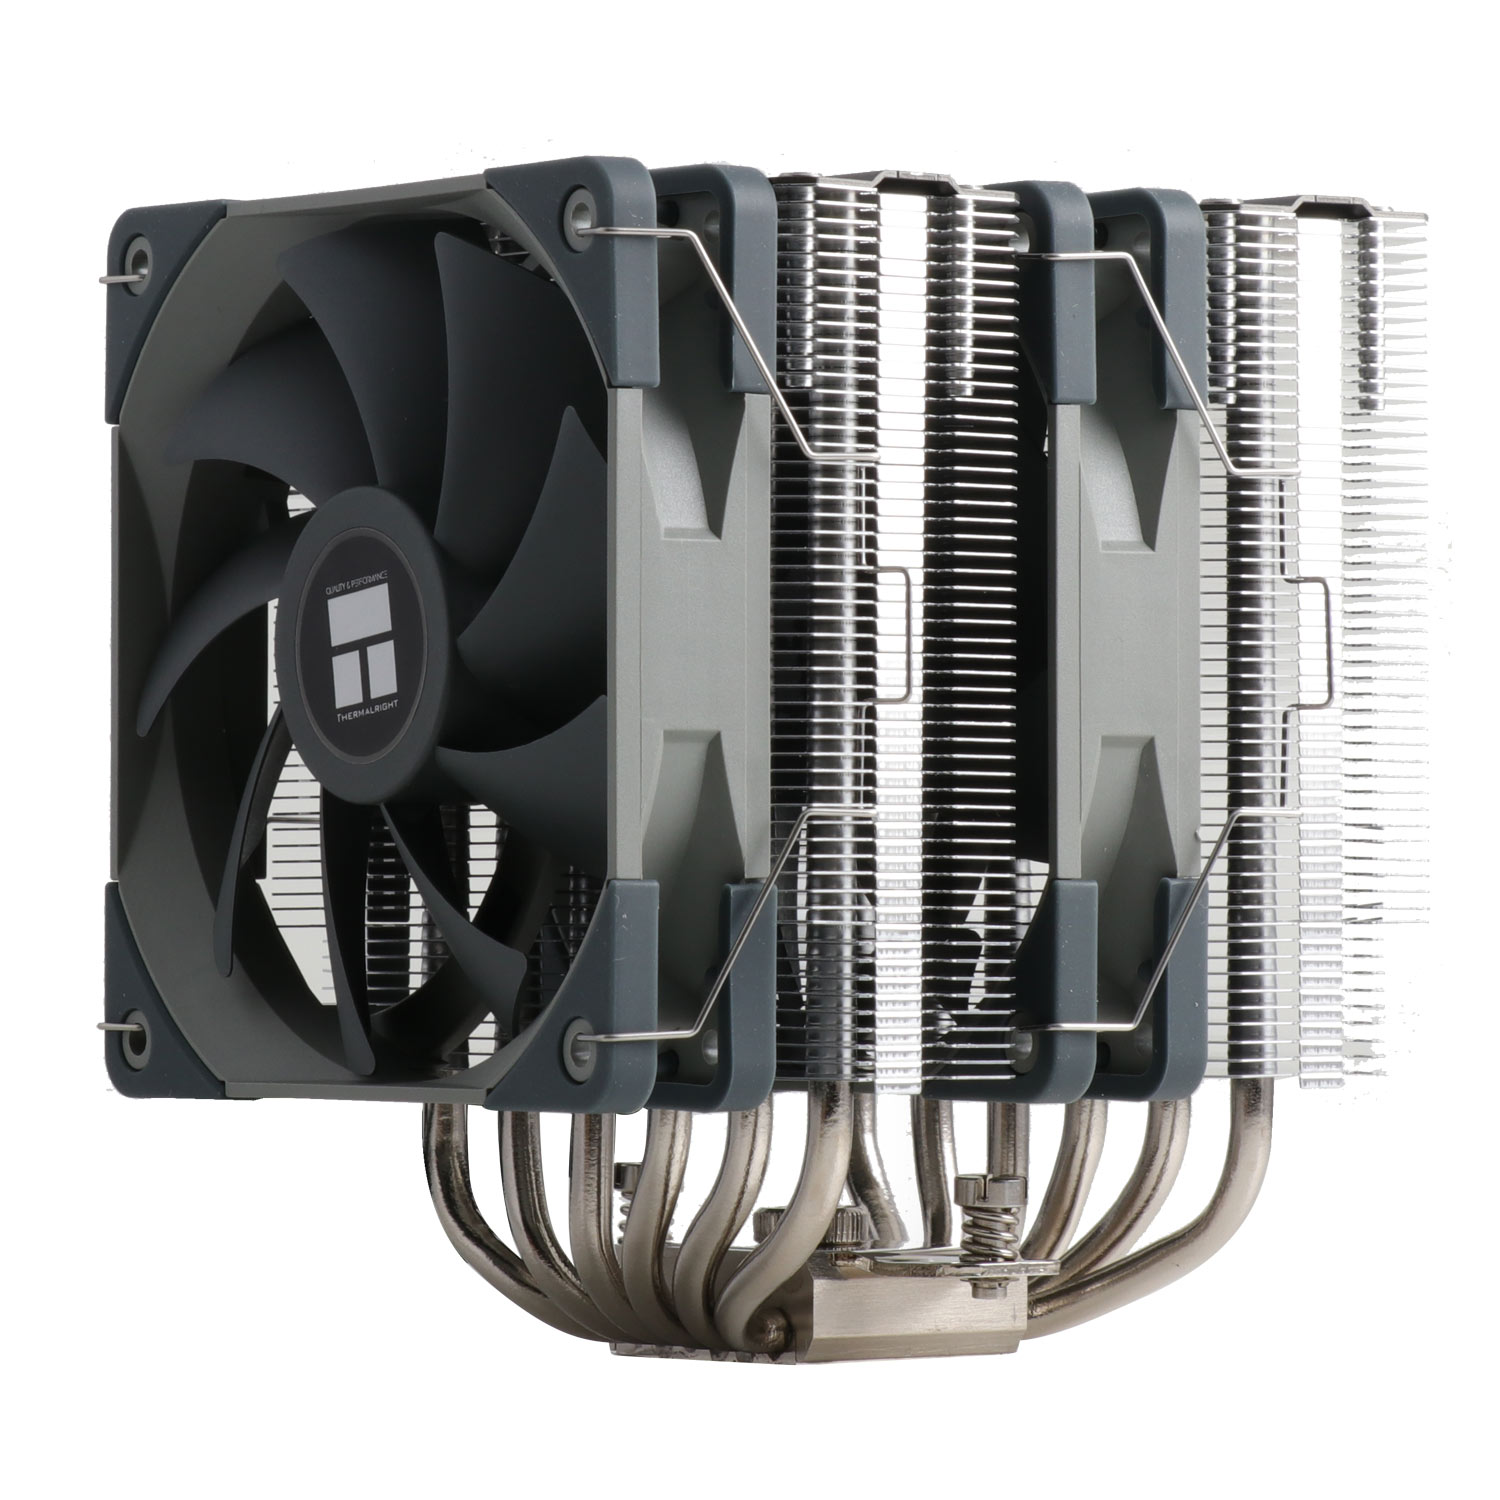 Assassin X 120 – Thermalright